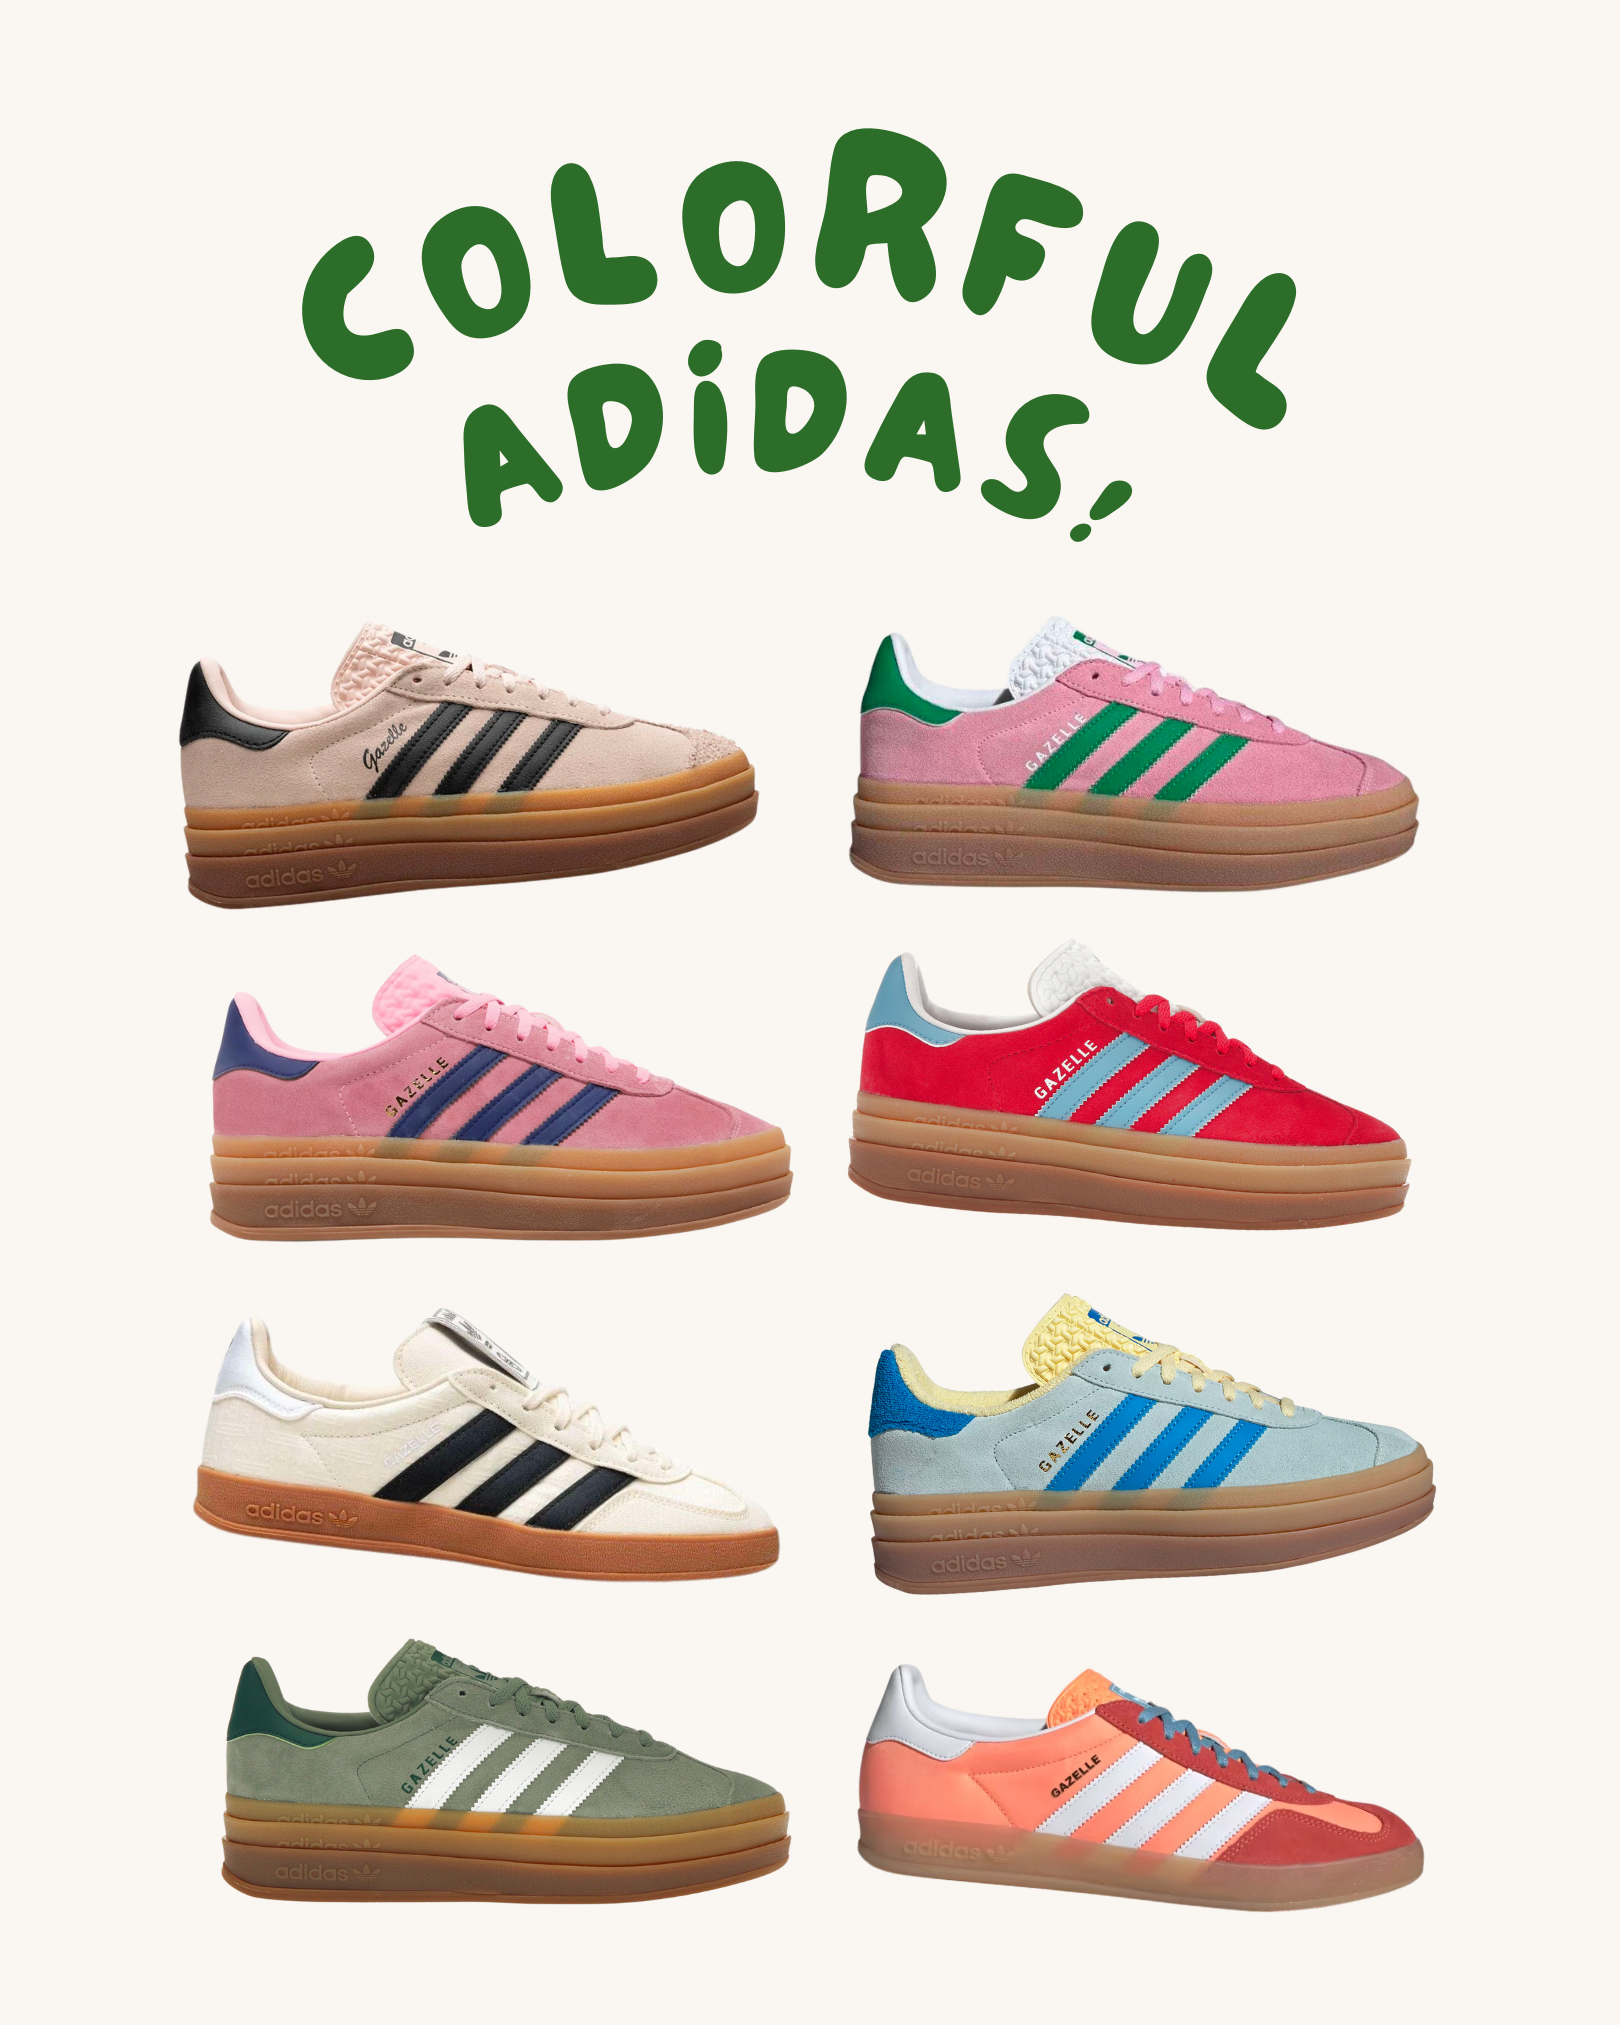 Colorful Adidas SNEAKERS For Spring - bresheppard.com.png